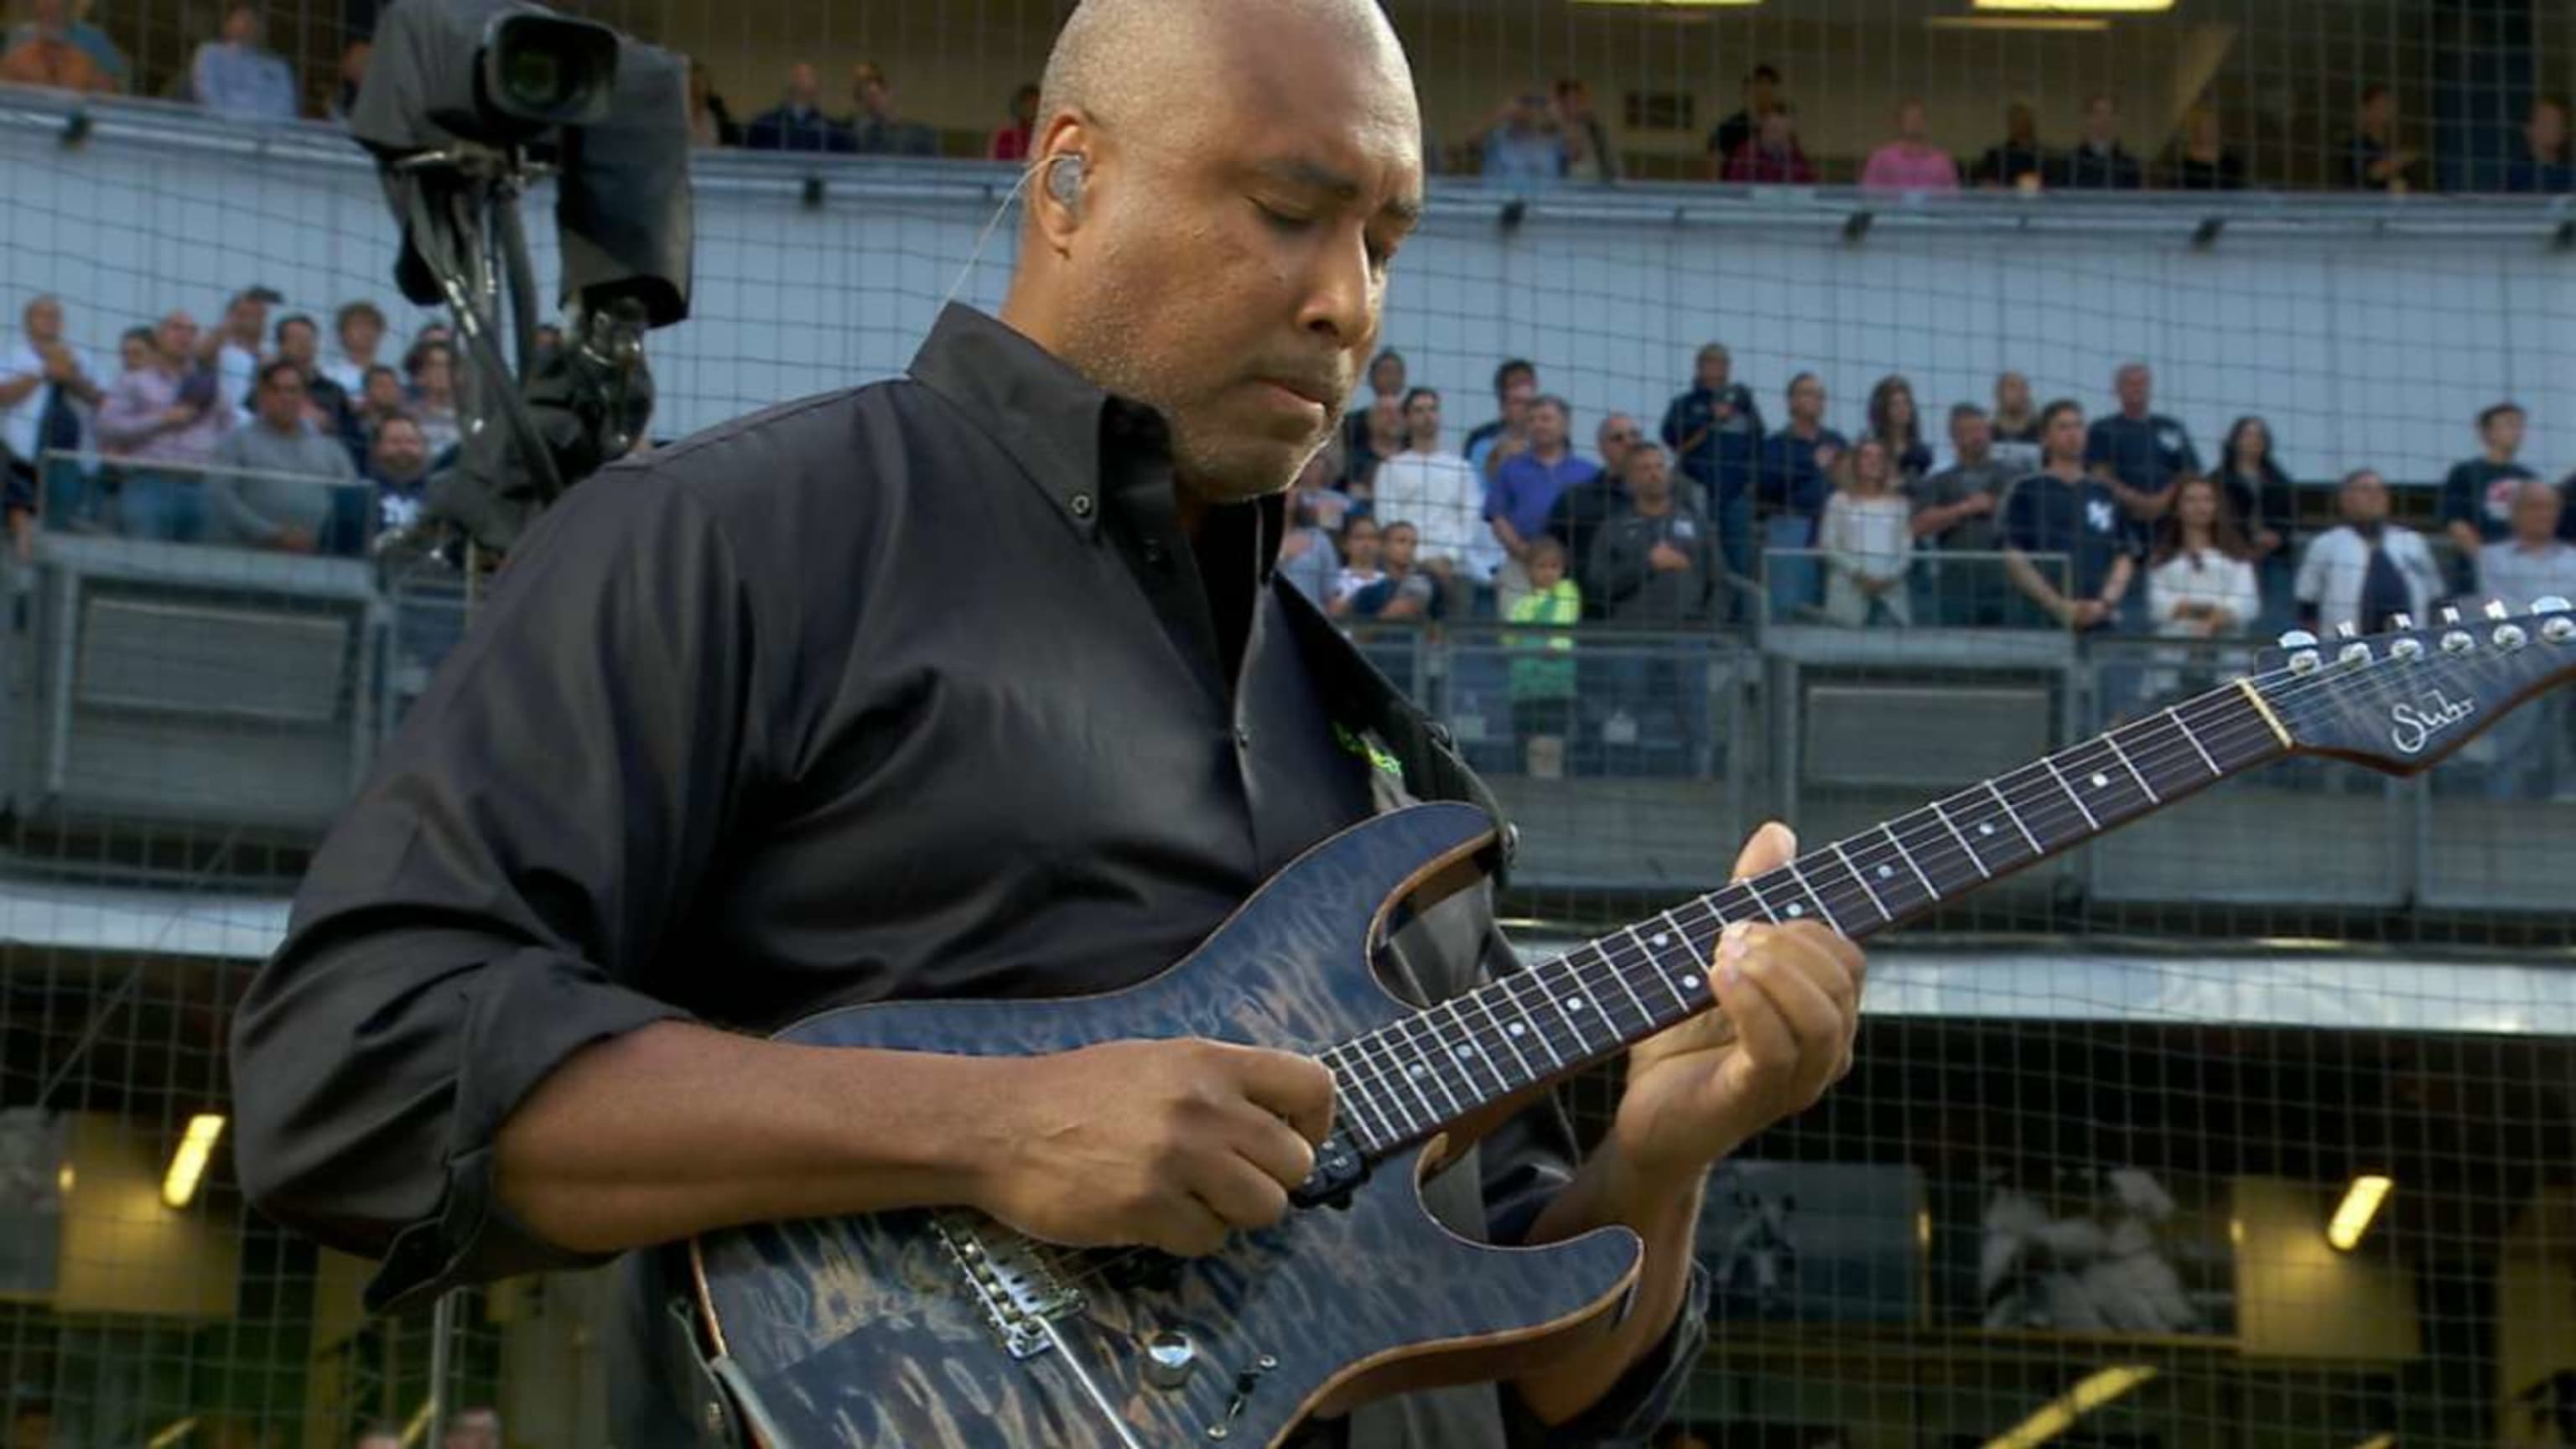 Former Yankees standout Bernie Williams finds calling in music